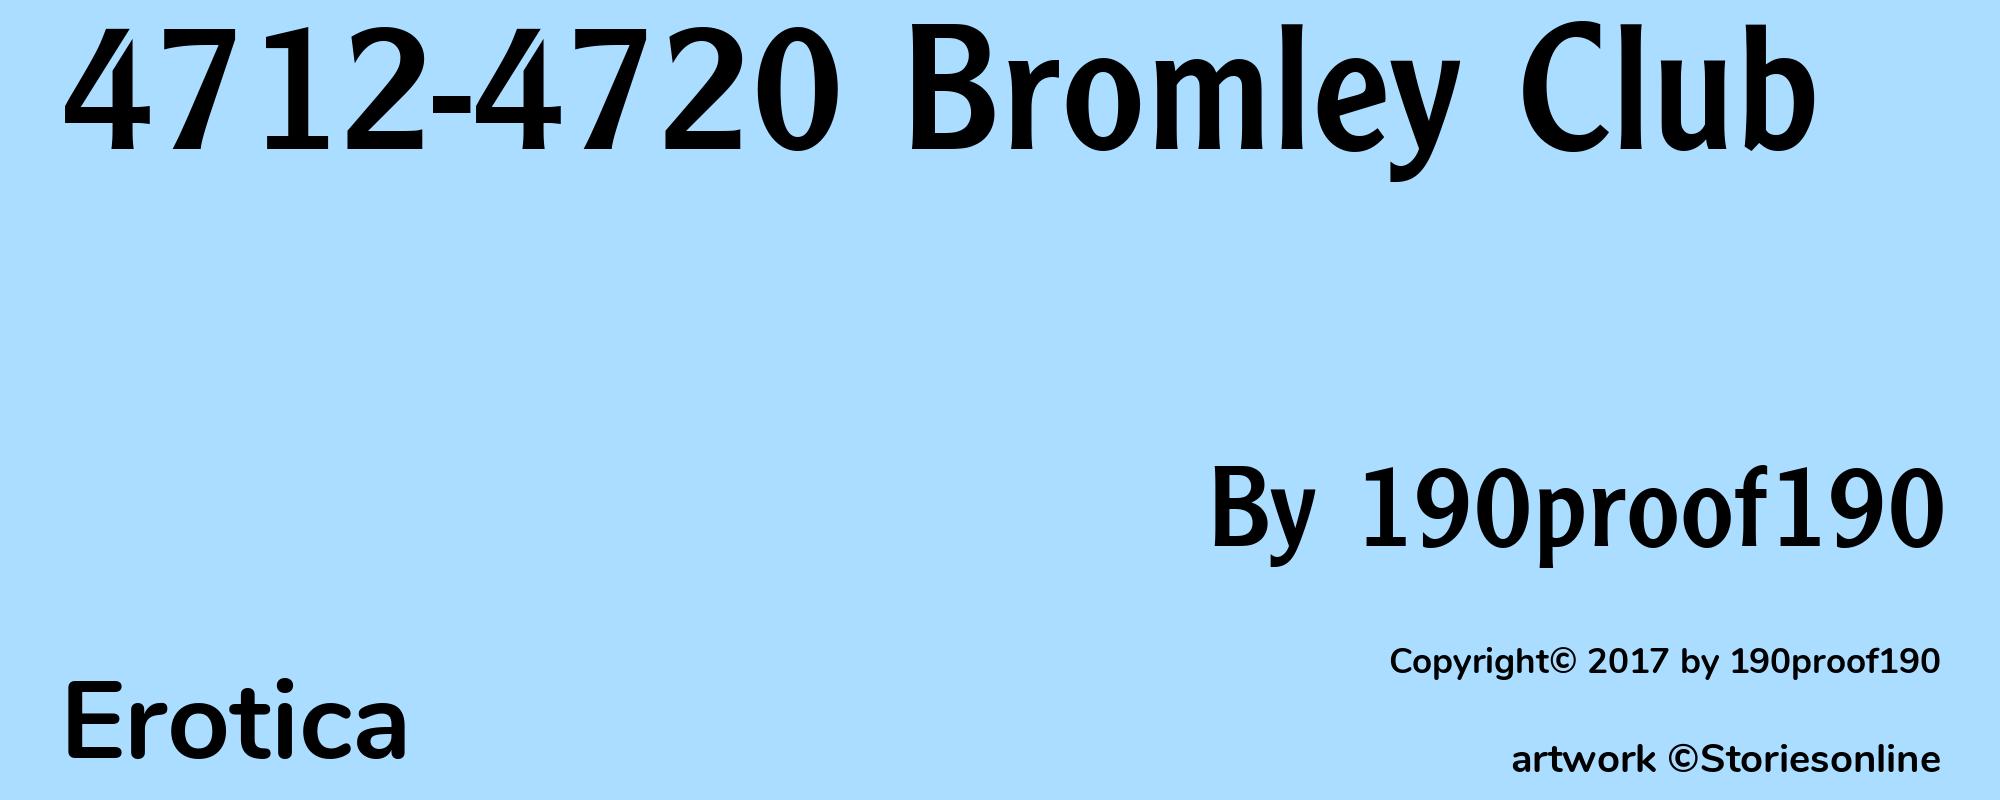 4712-4720 Bromley Club - Cover